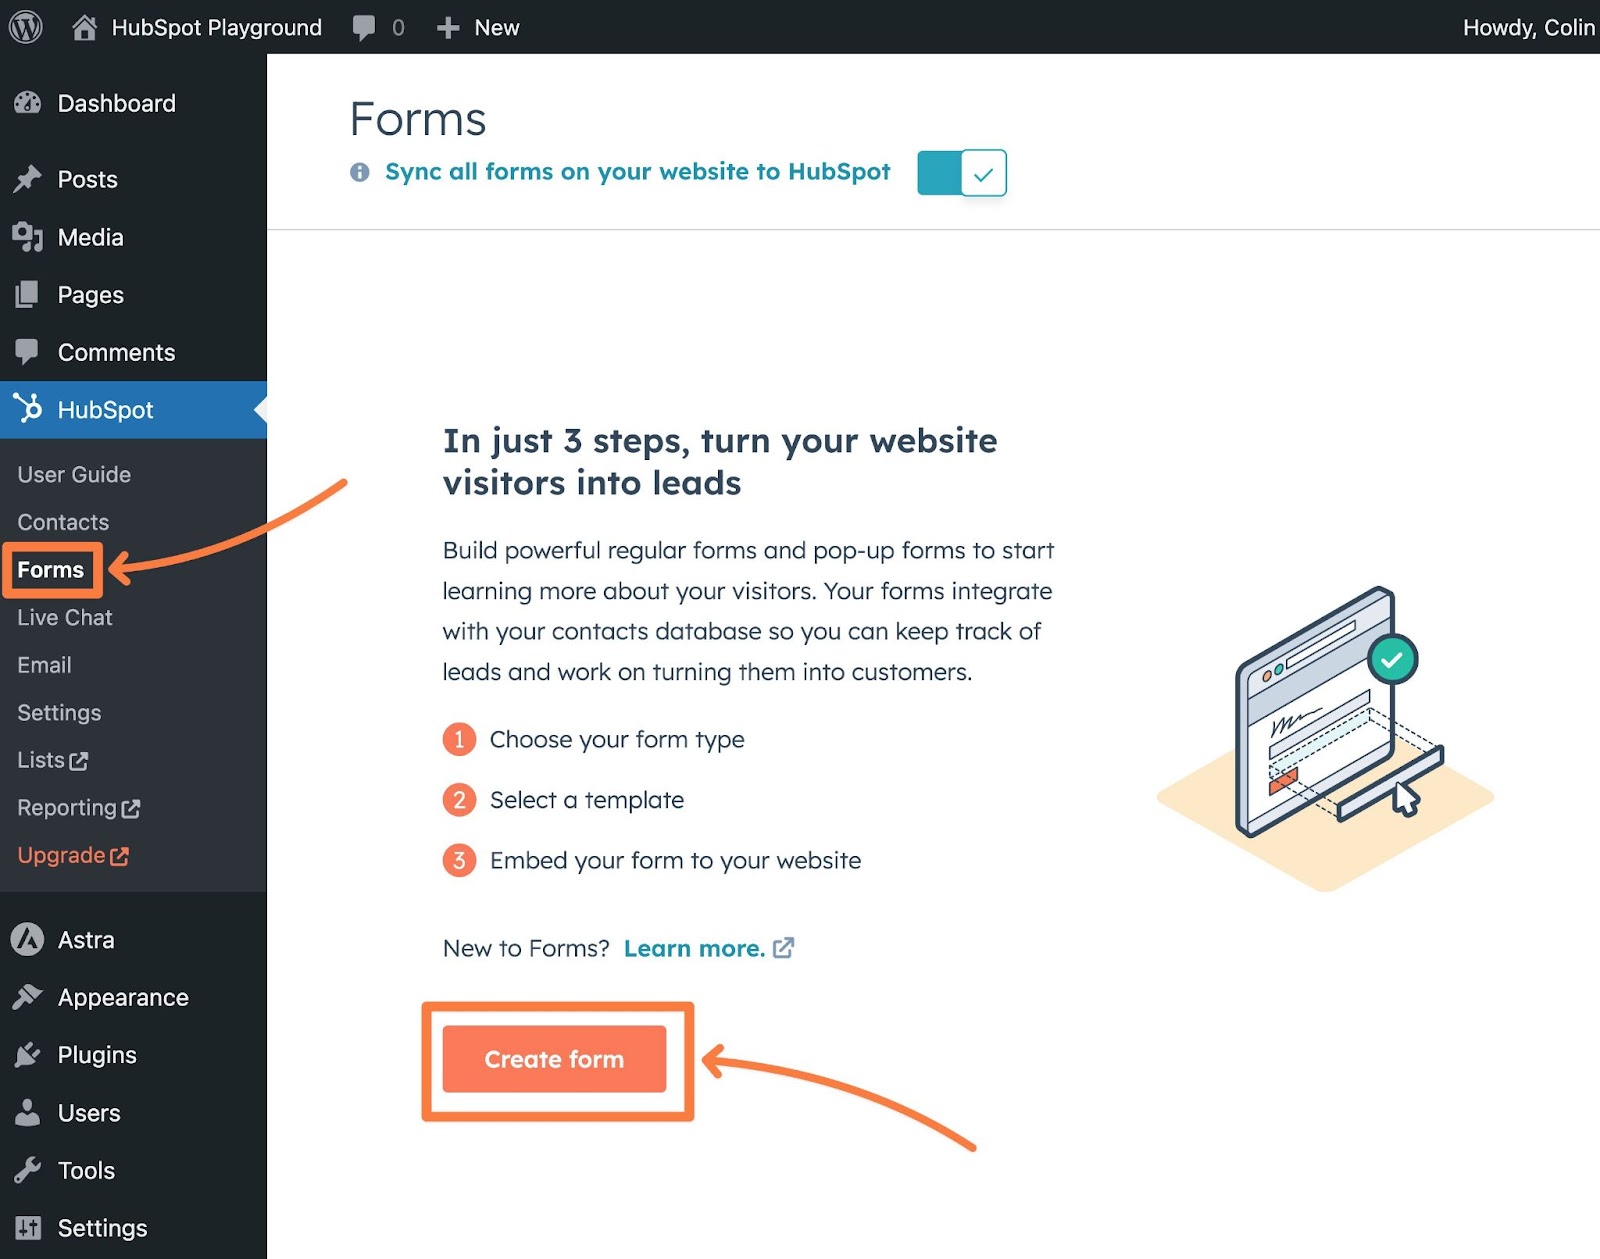  How to create a new signup form in the HubSpot WordPress newsletter plugin